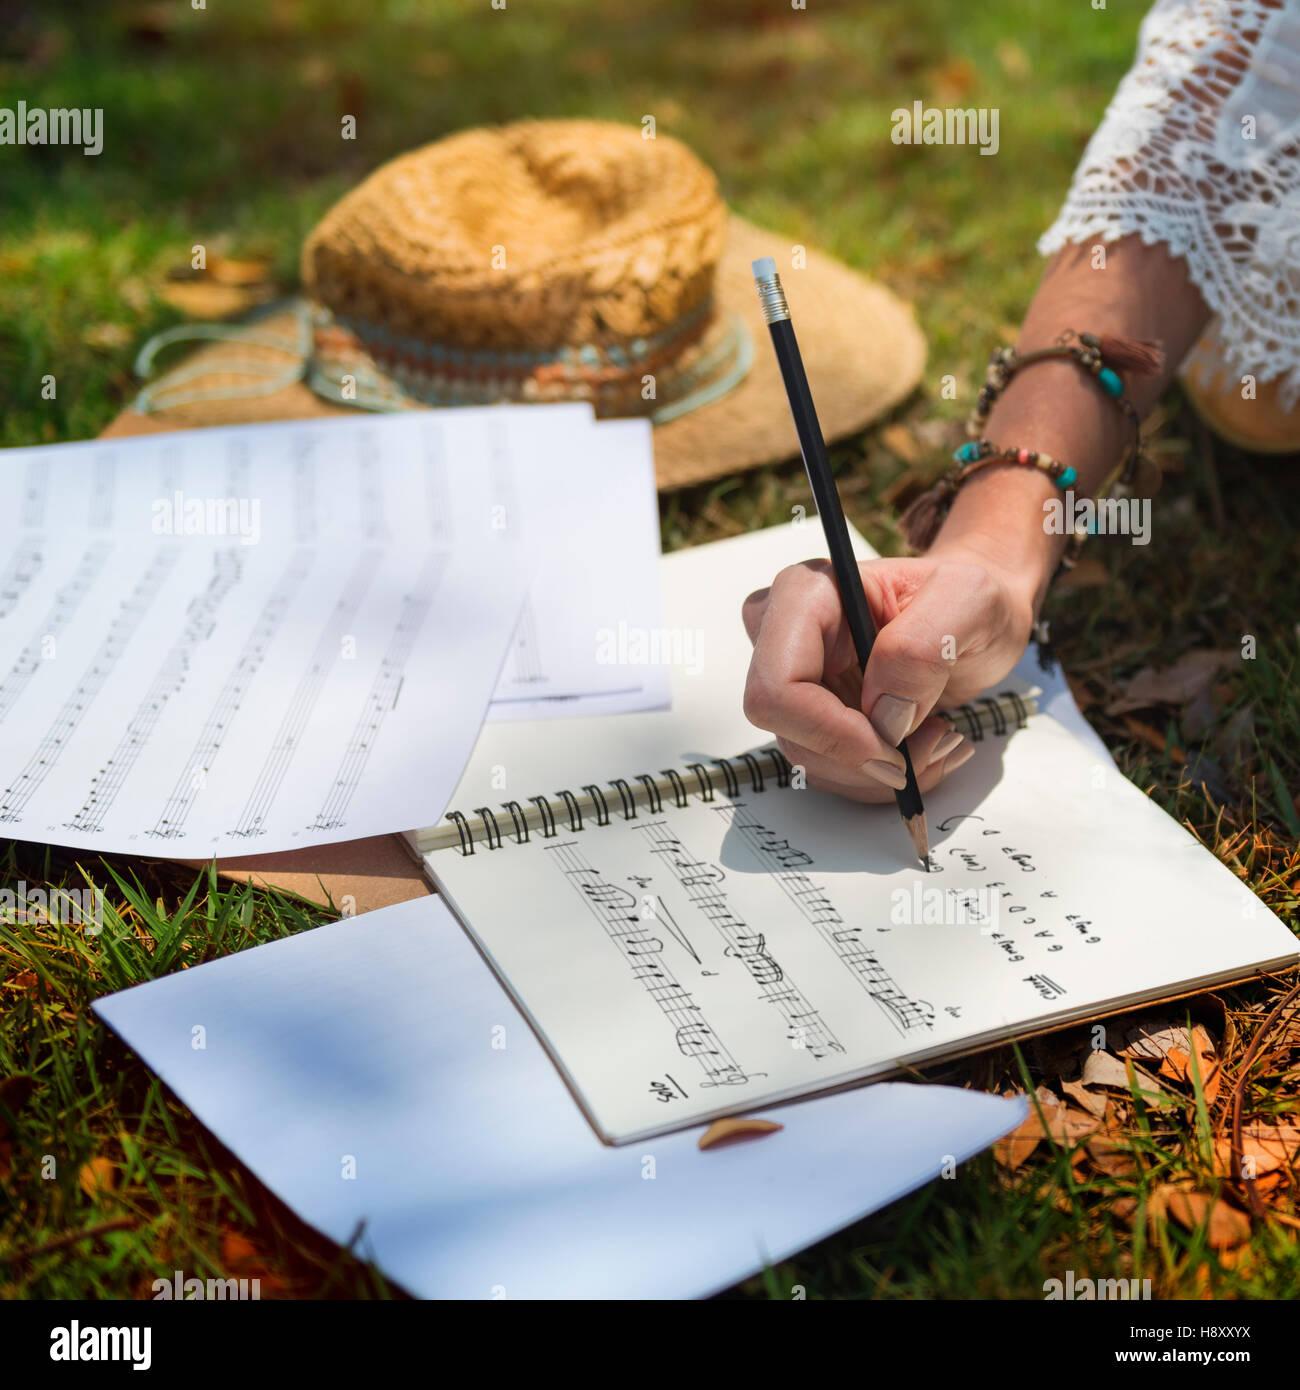 Hippie Musician Songwriter Writing Concept Stock Photo